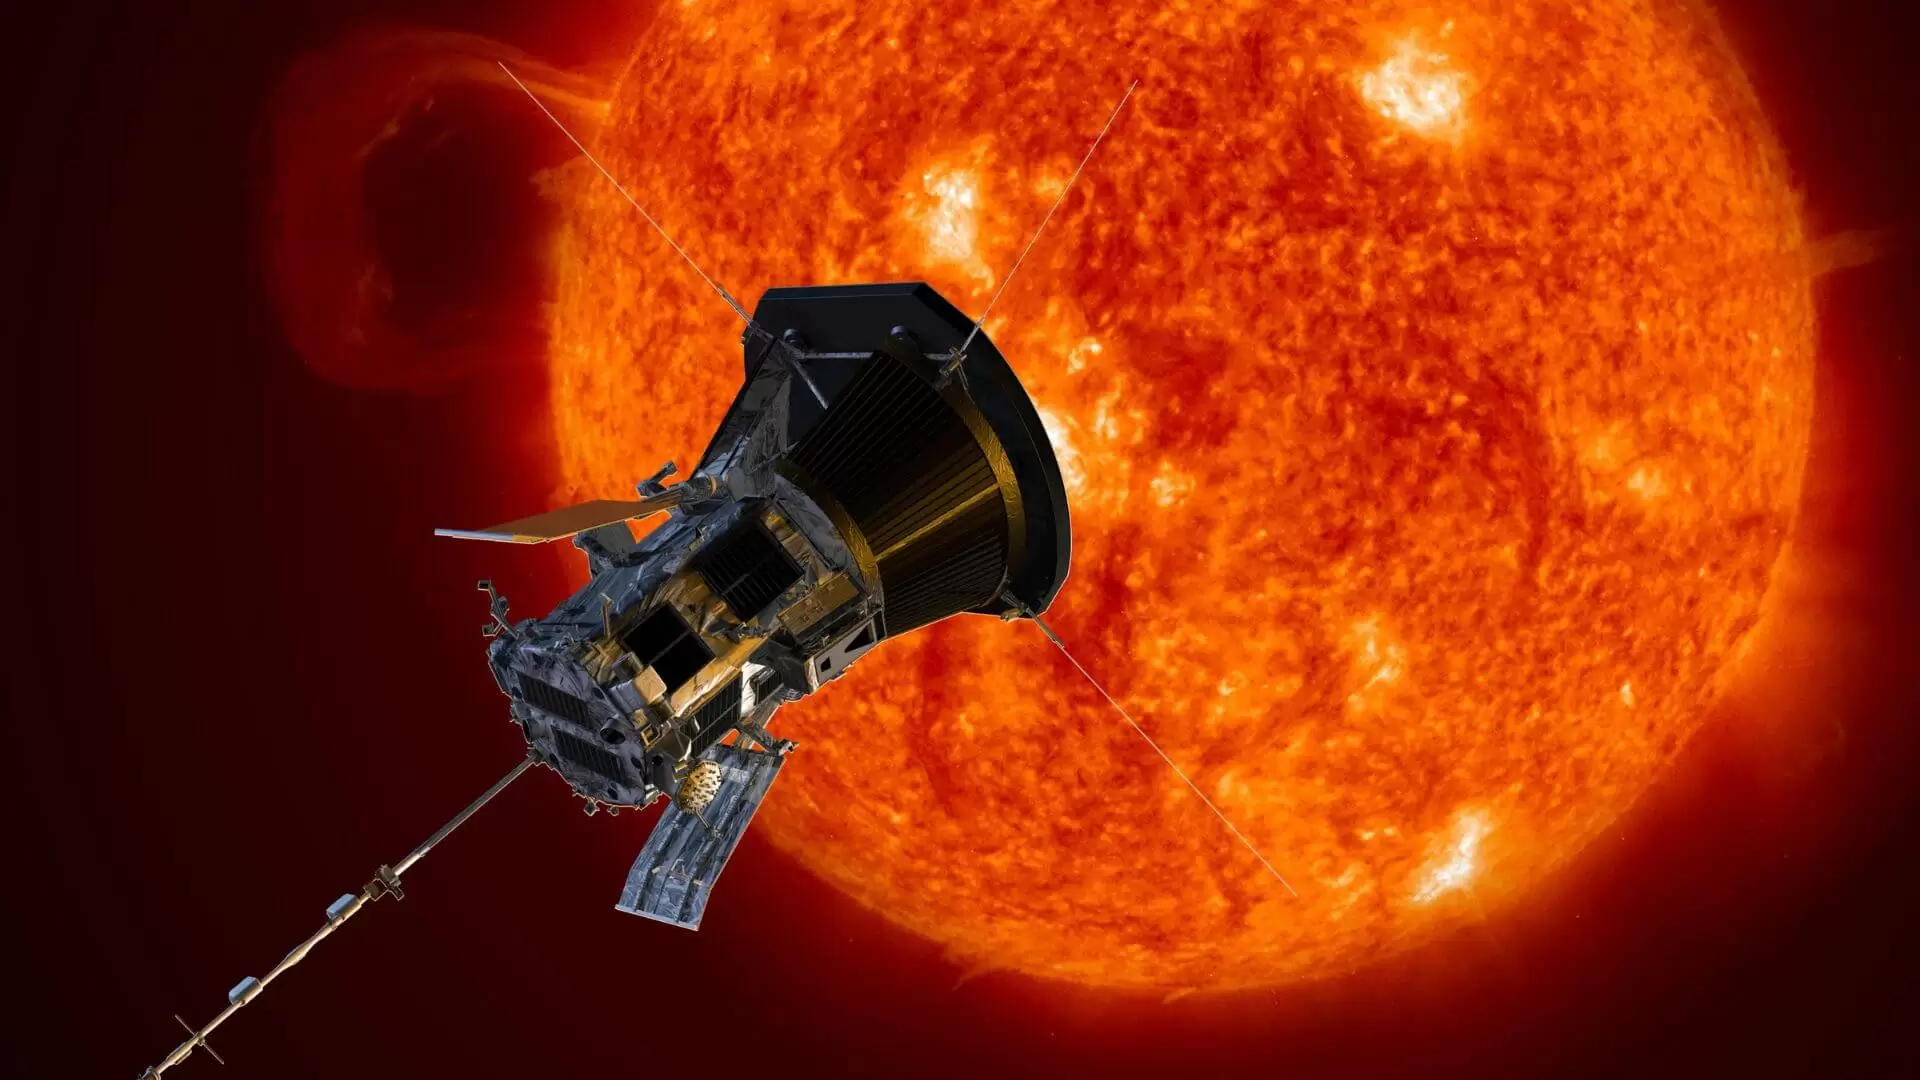 A NASA Spacecraft 'Touches' The Sun For The First Time (1)